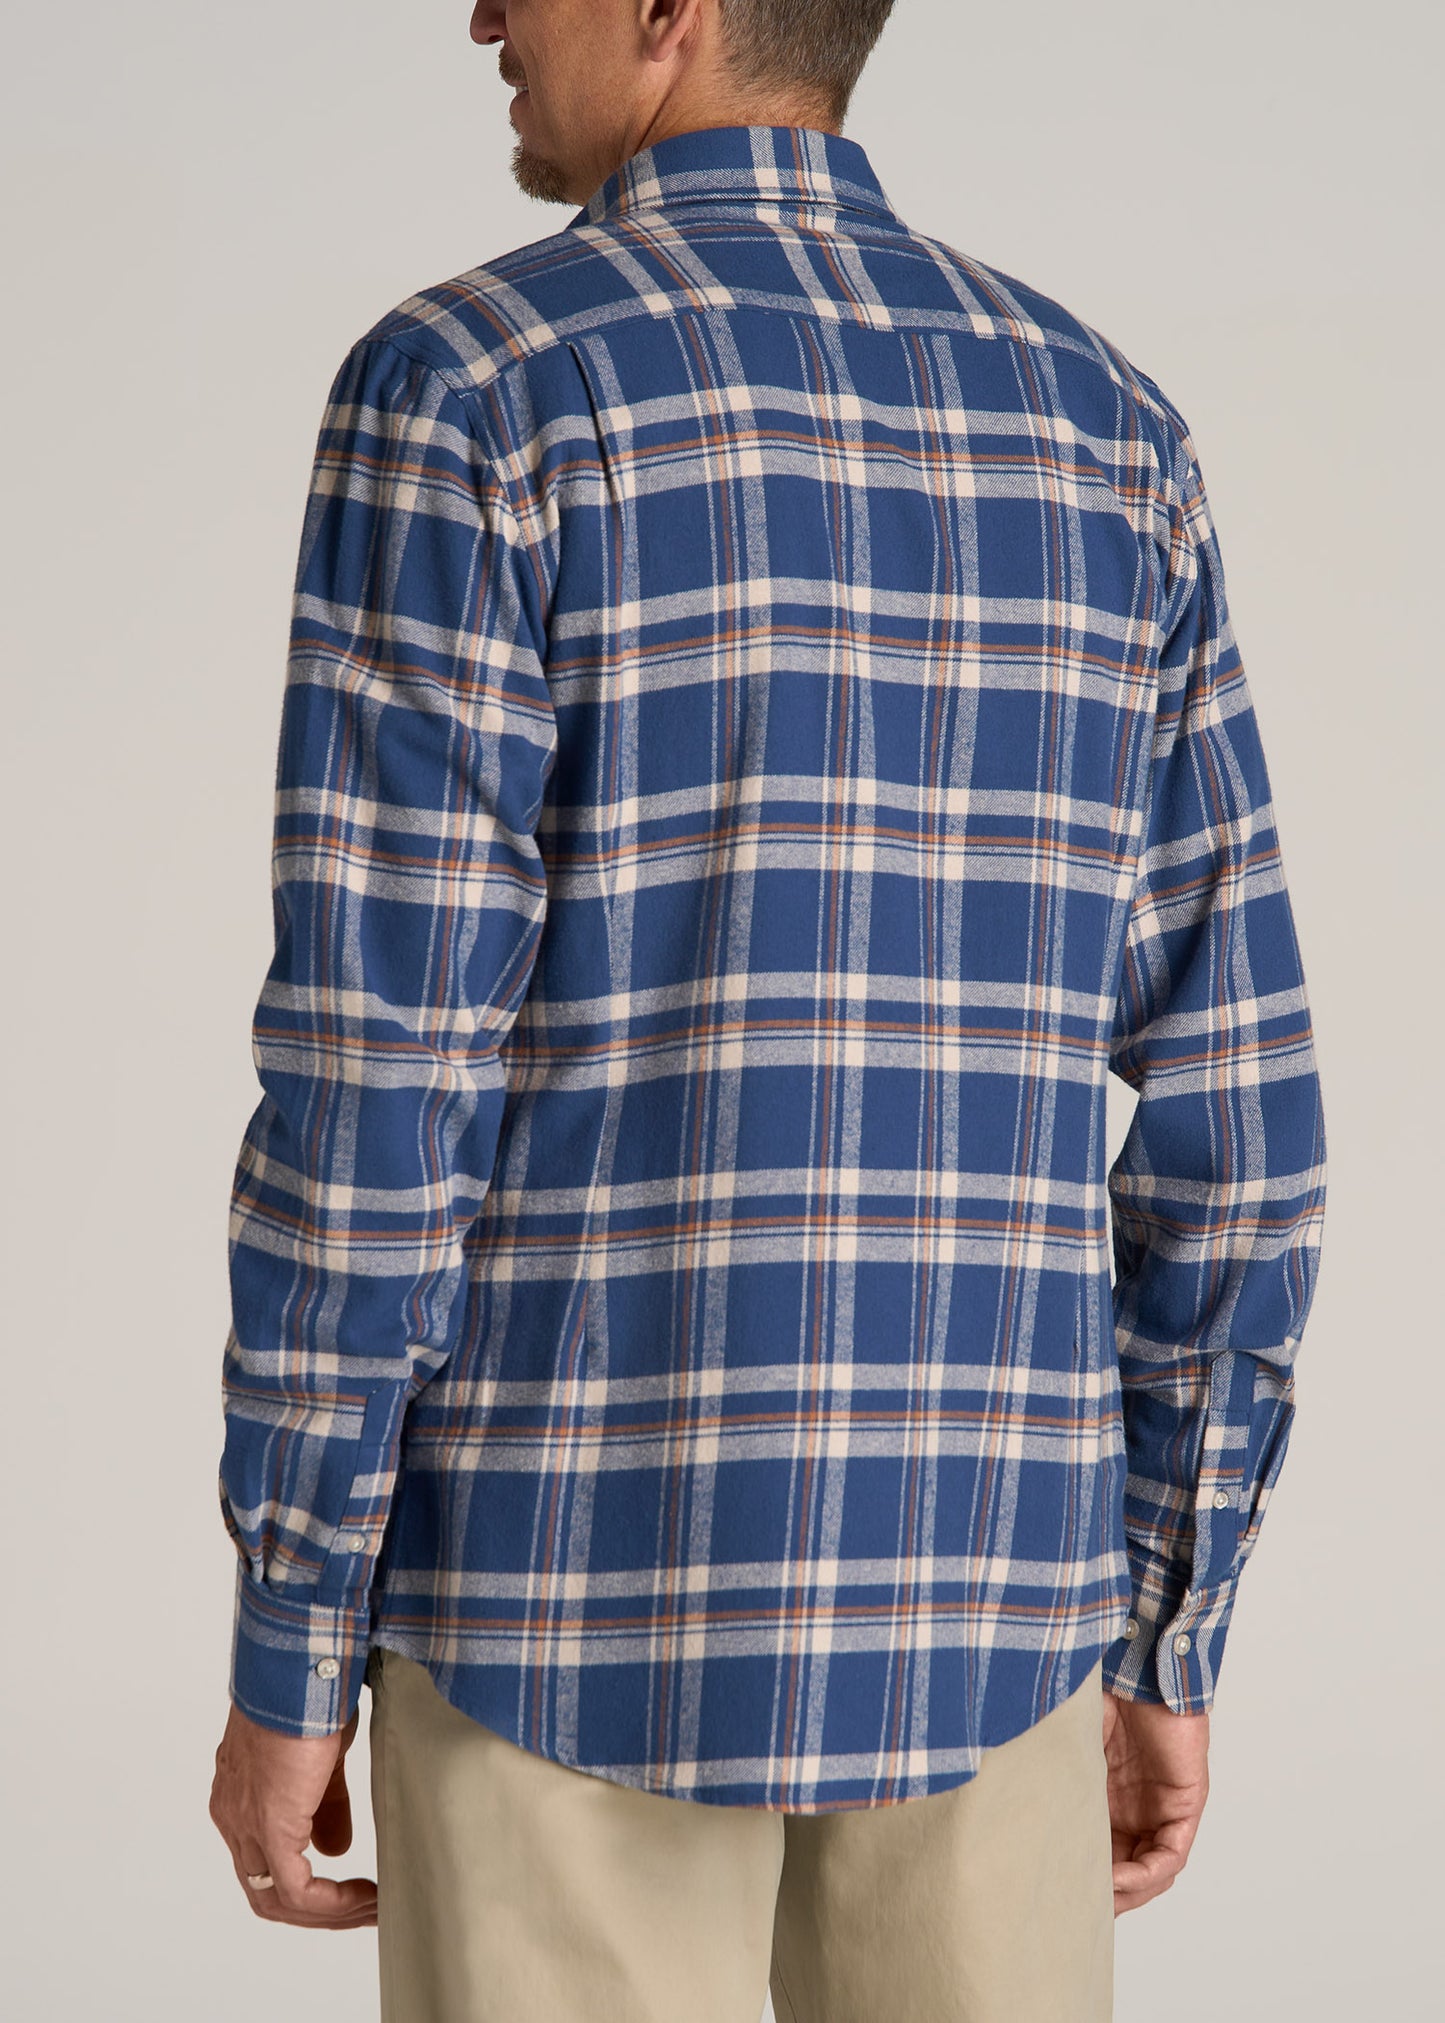 Nelson Flannel Shirt for Tall Men | American Tall